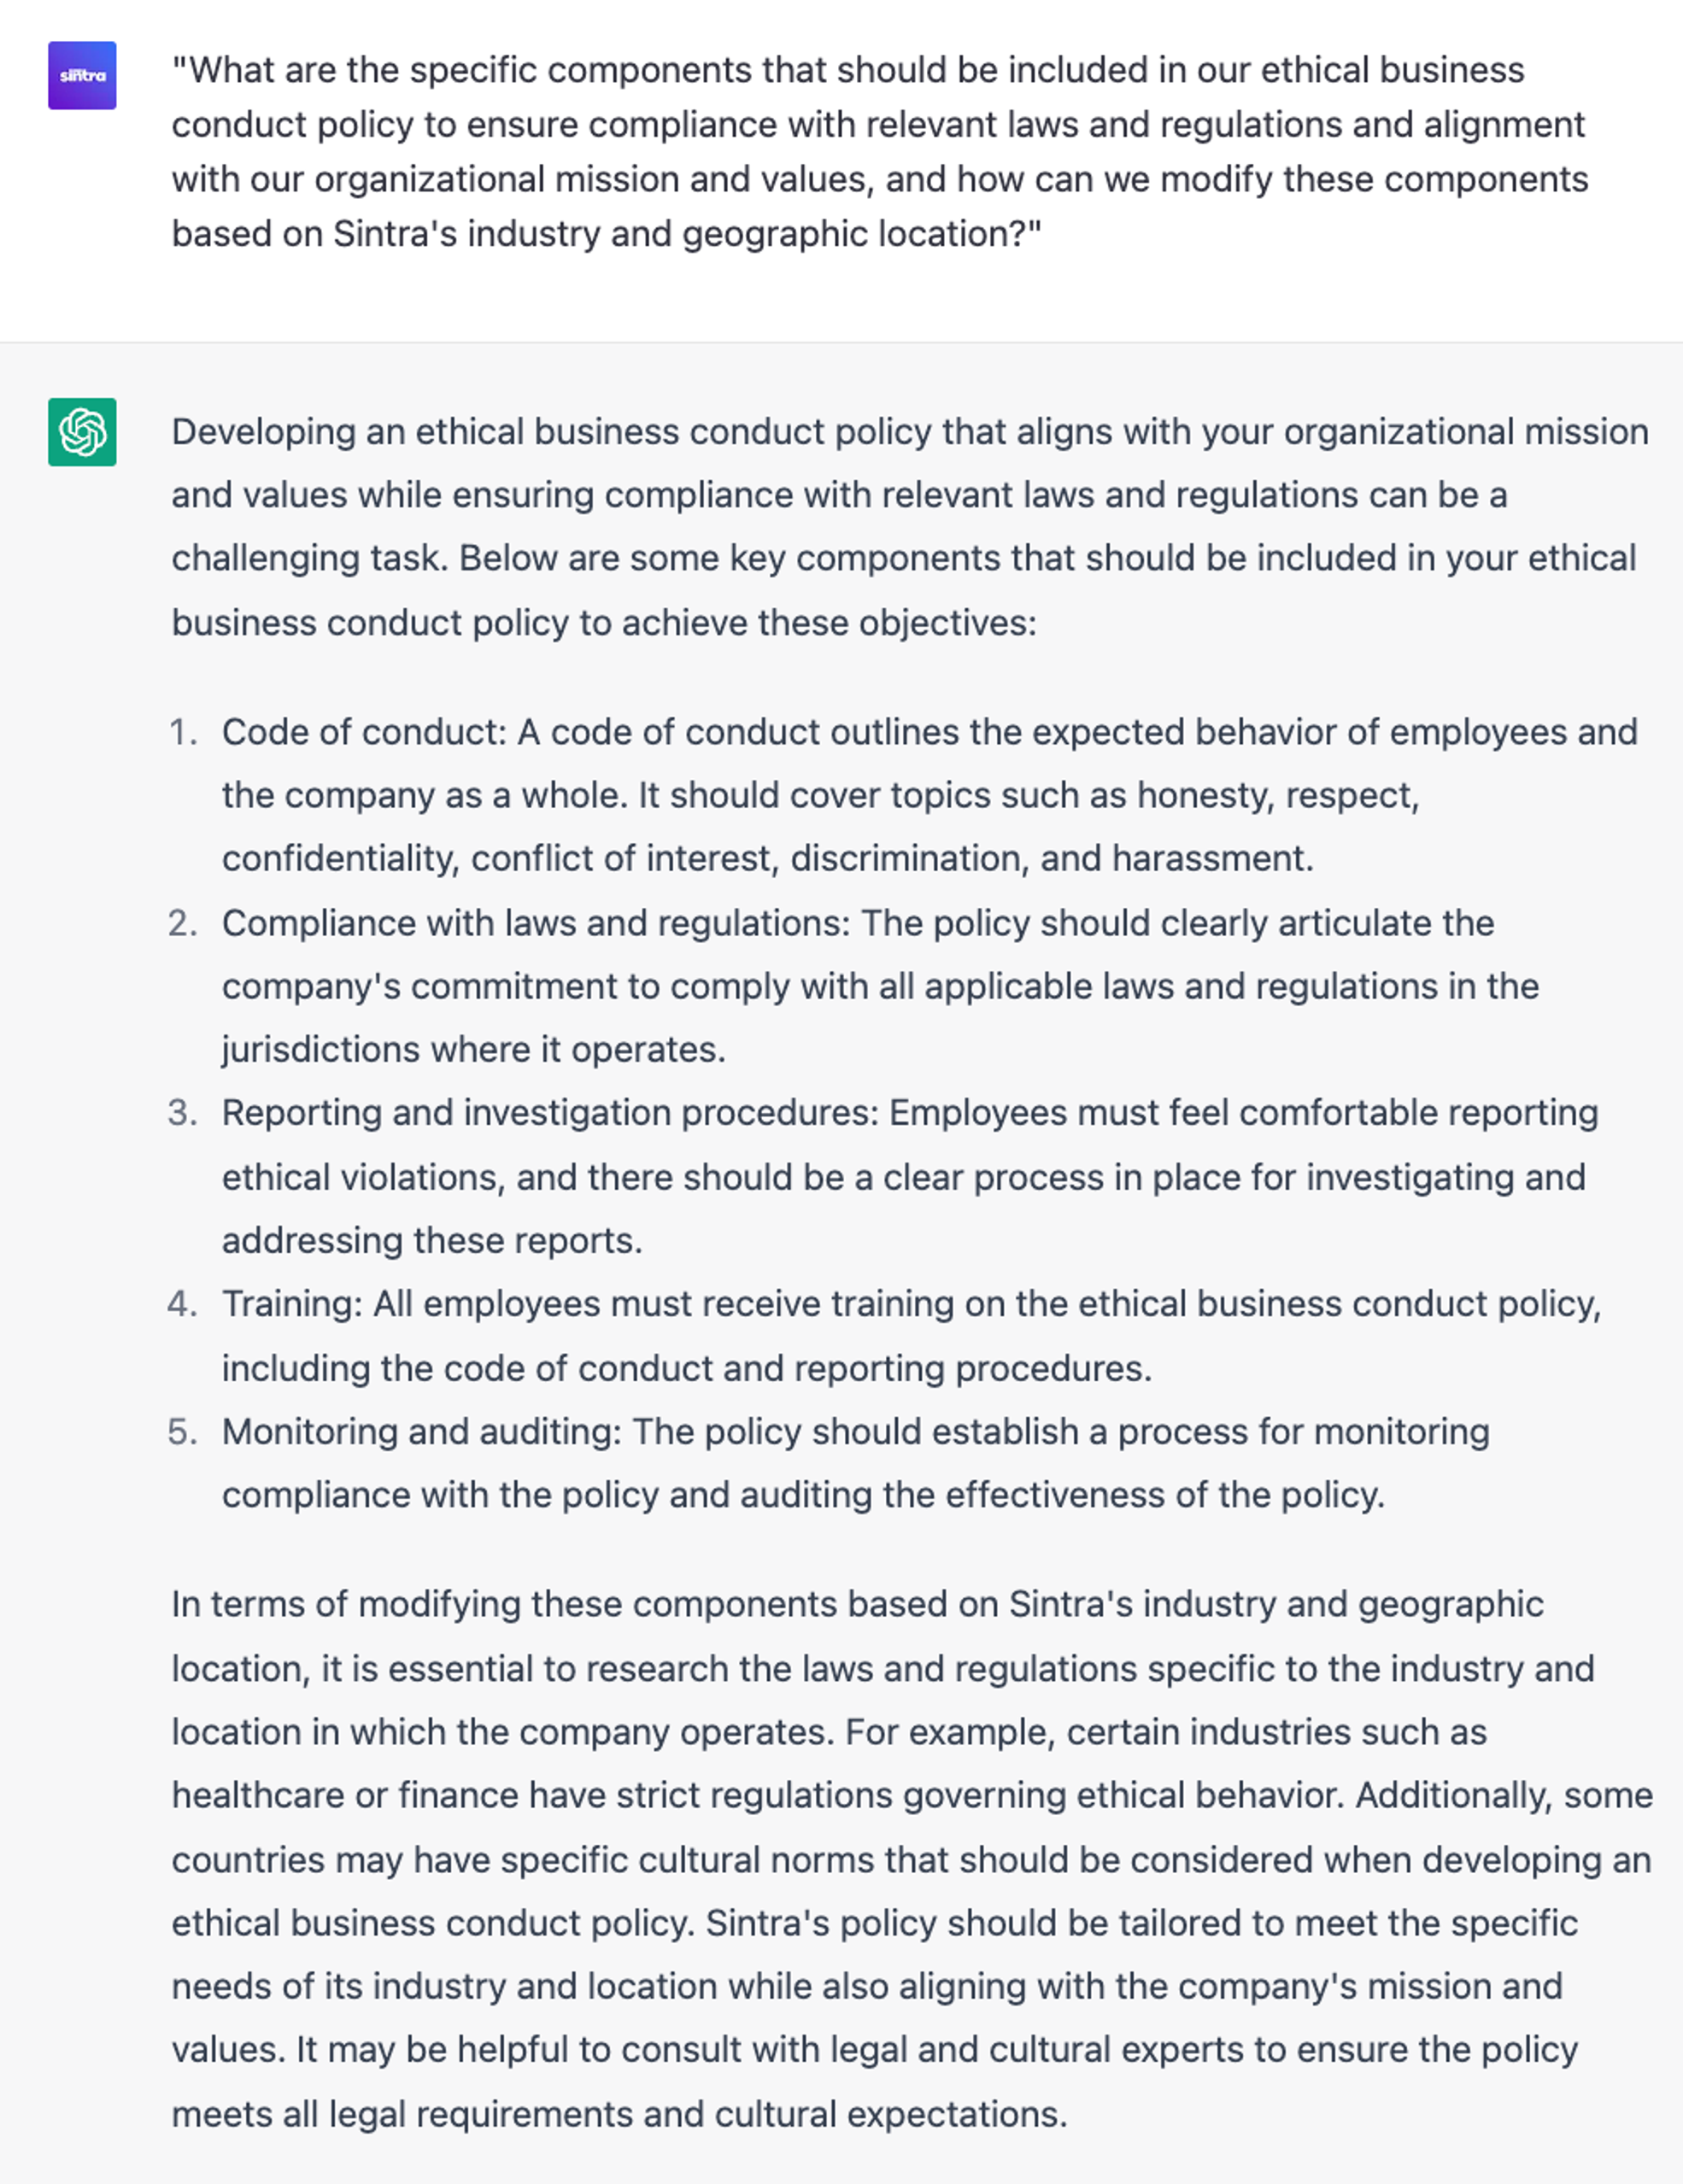 6 Strategic ChatGPT Prompts: Developing ethical business conduct policies